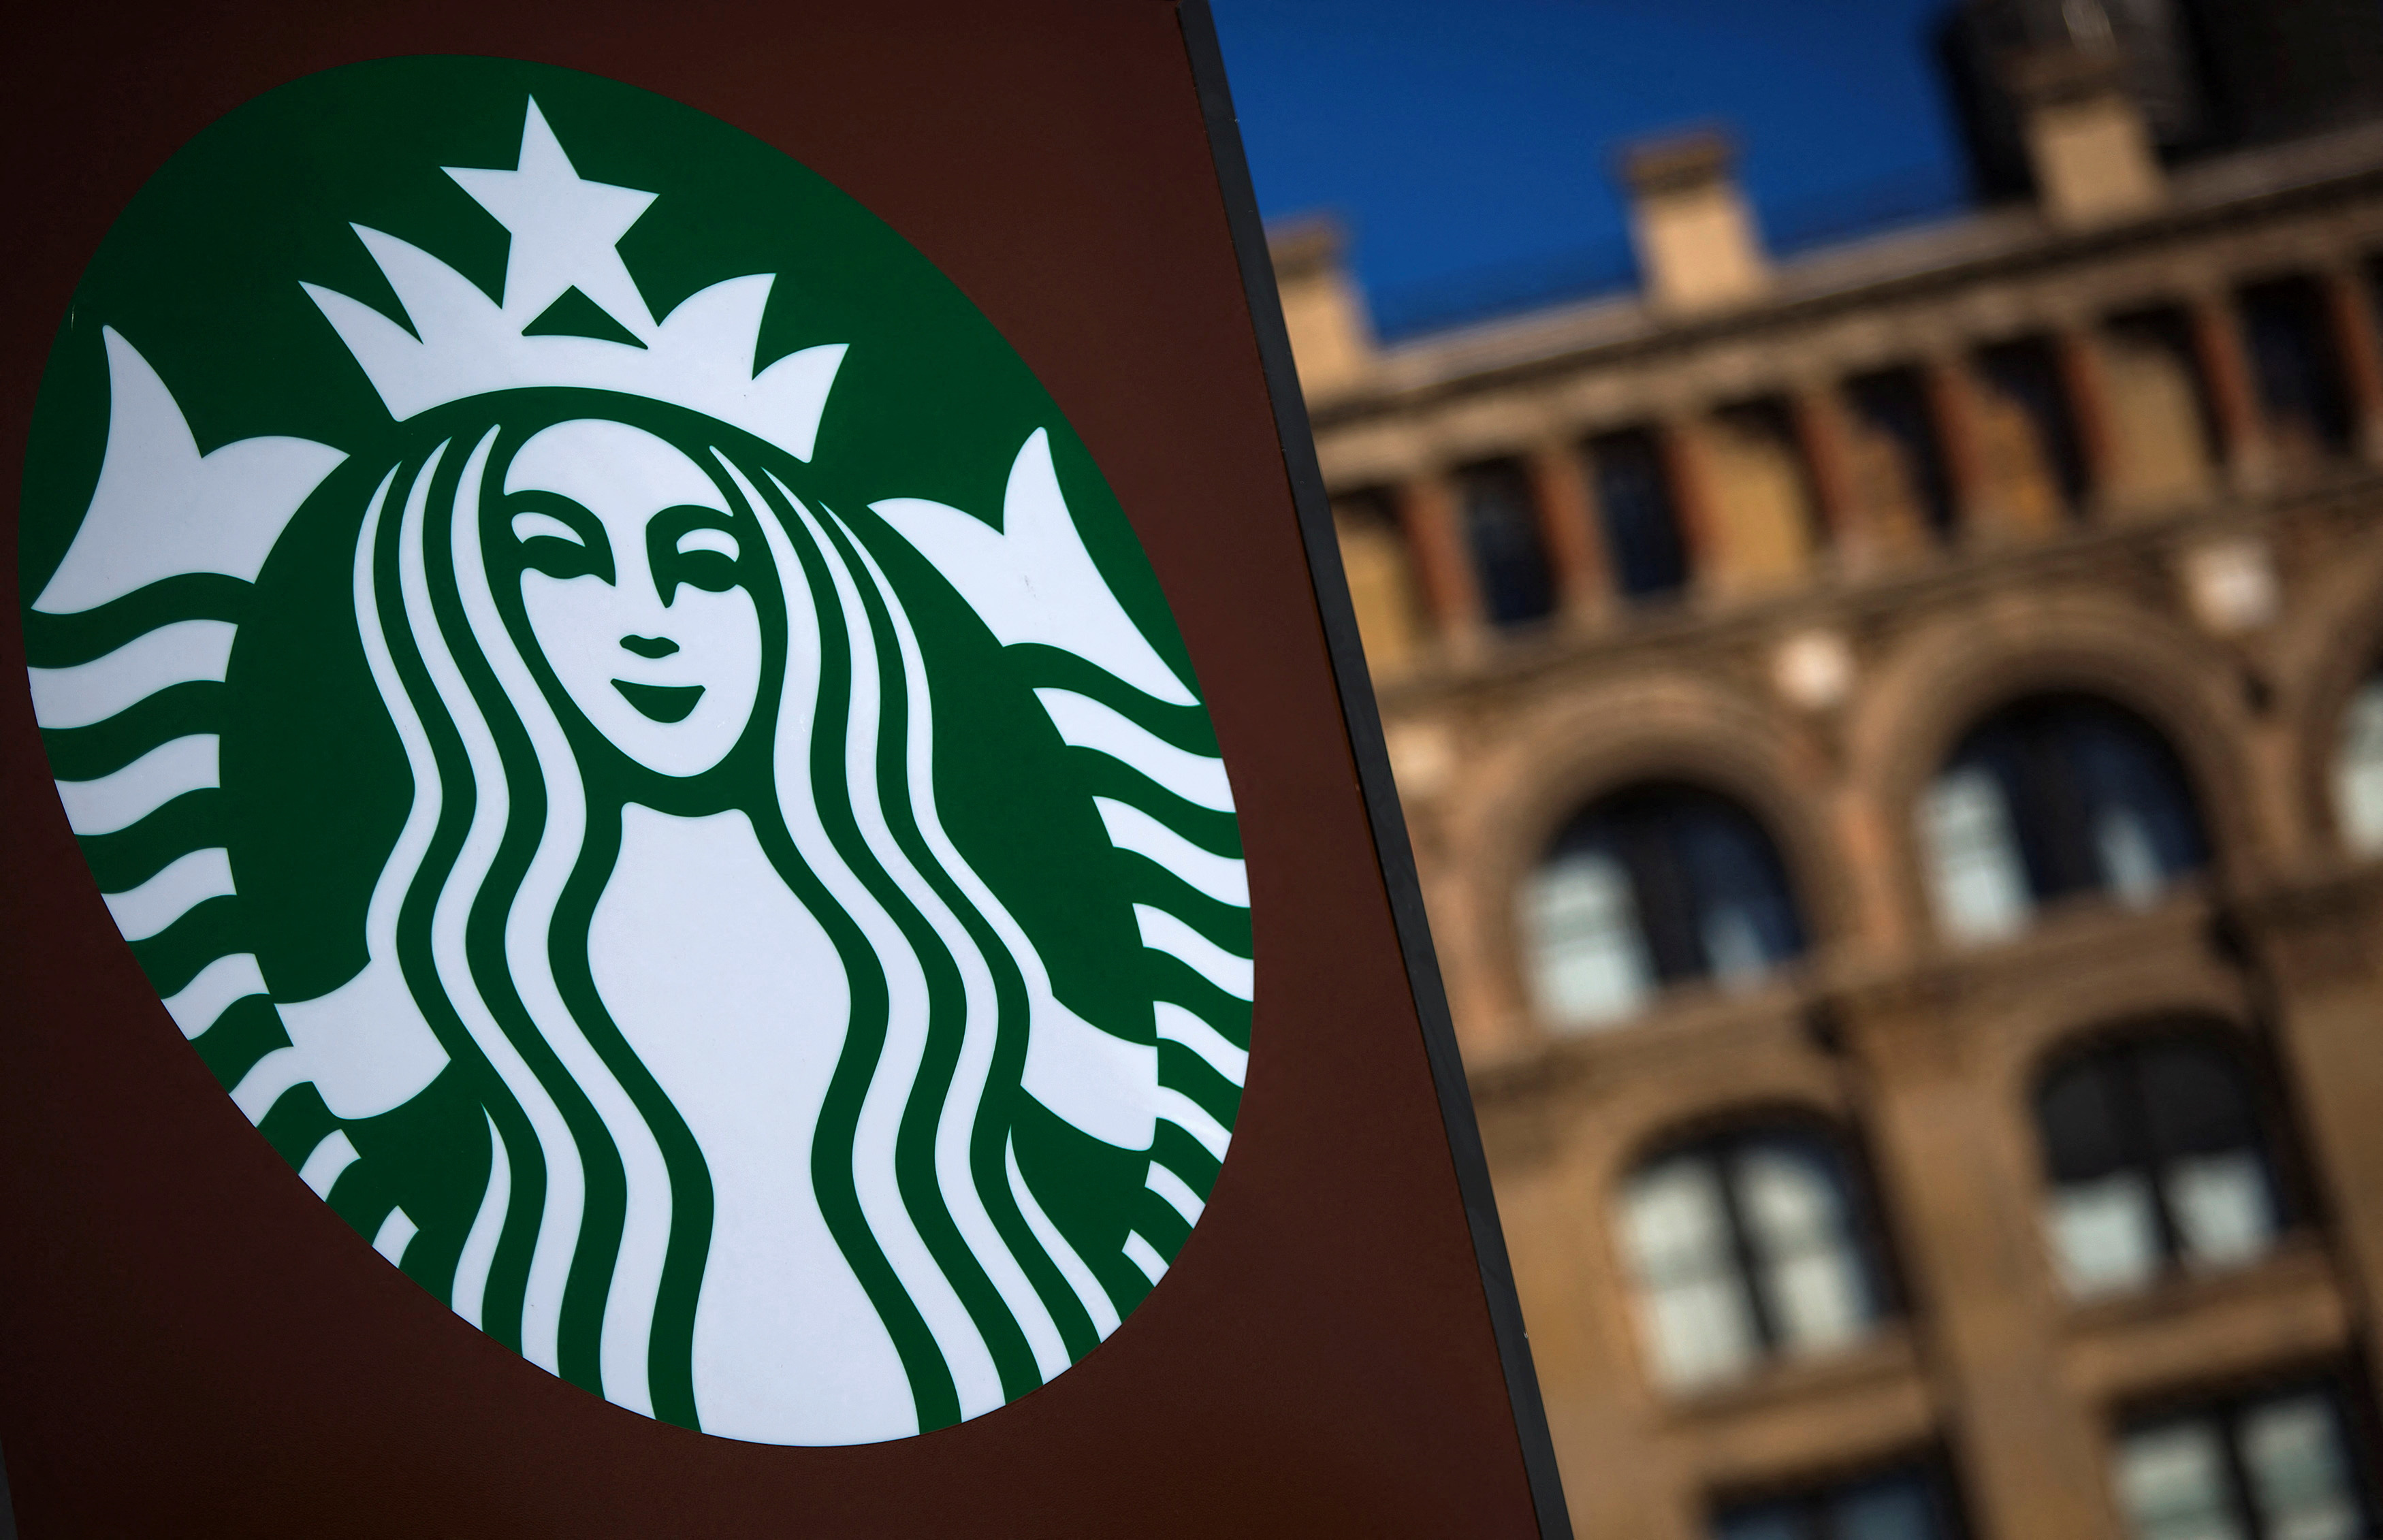 Starbucks Worker Fired For Sharing Stanley Drinkware Collab